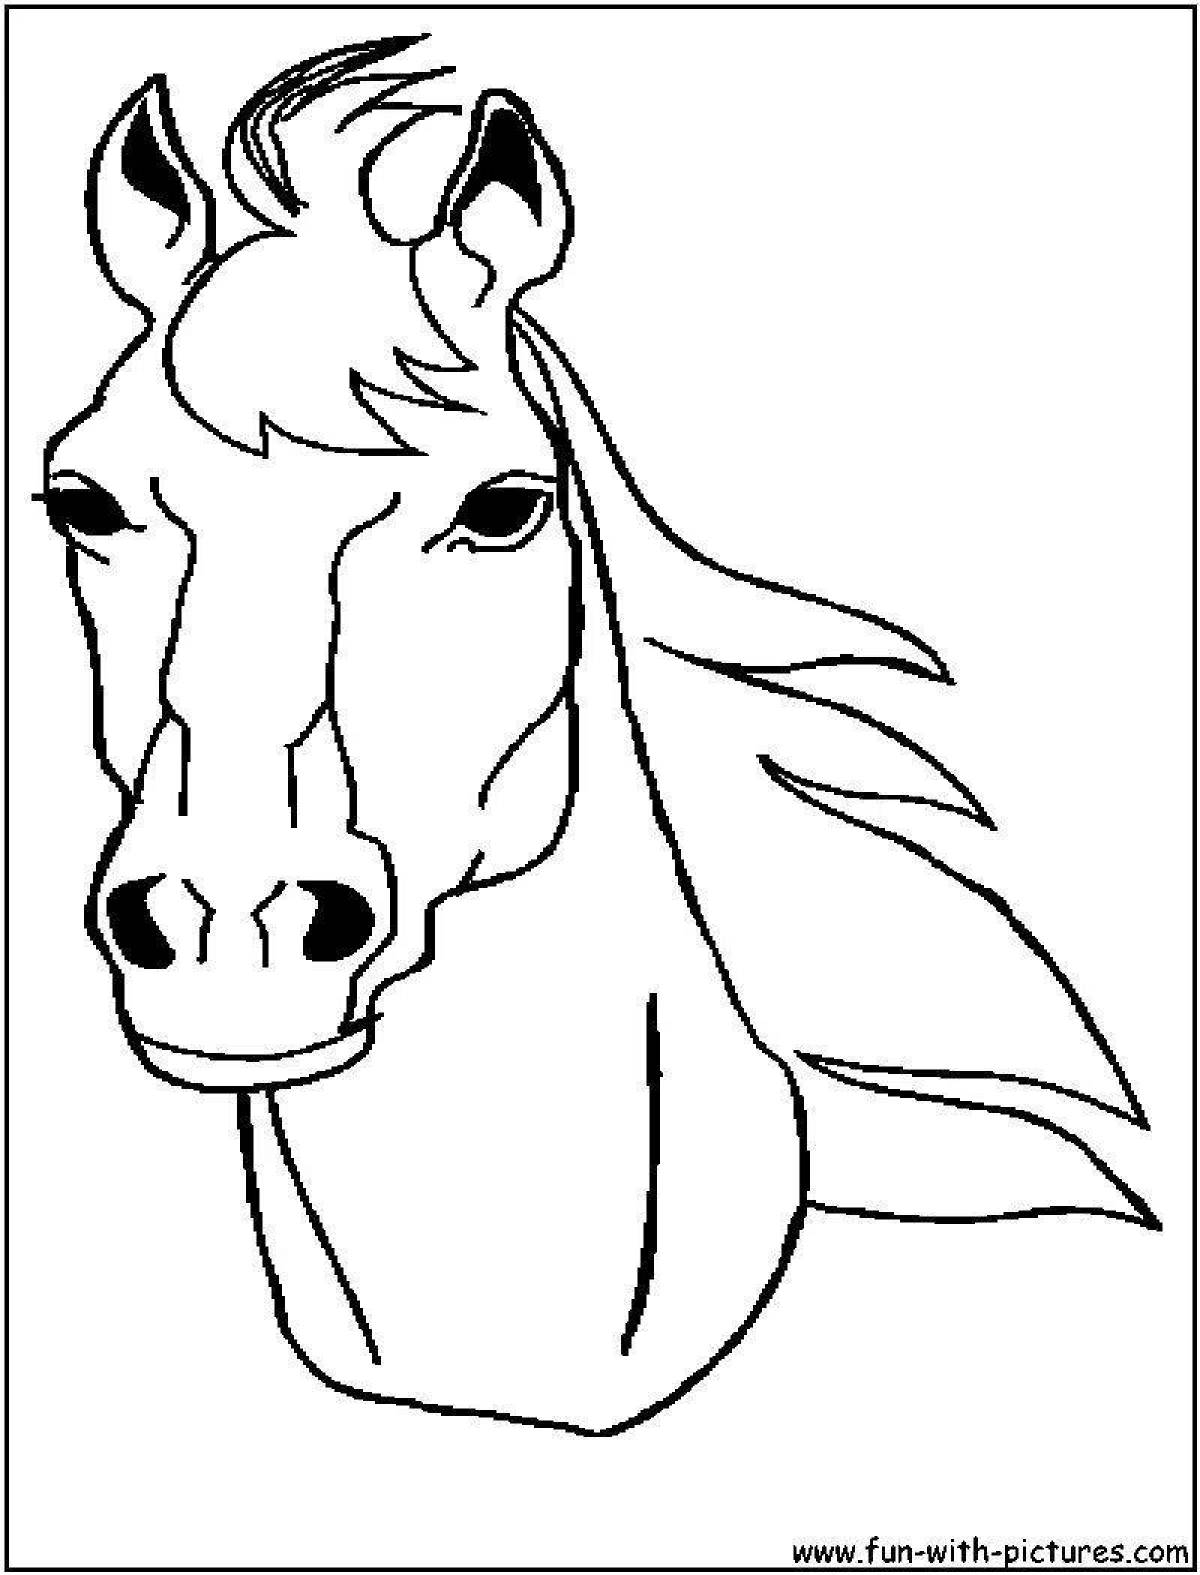 Decorated horse head coloring book